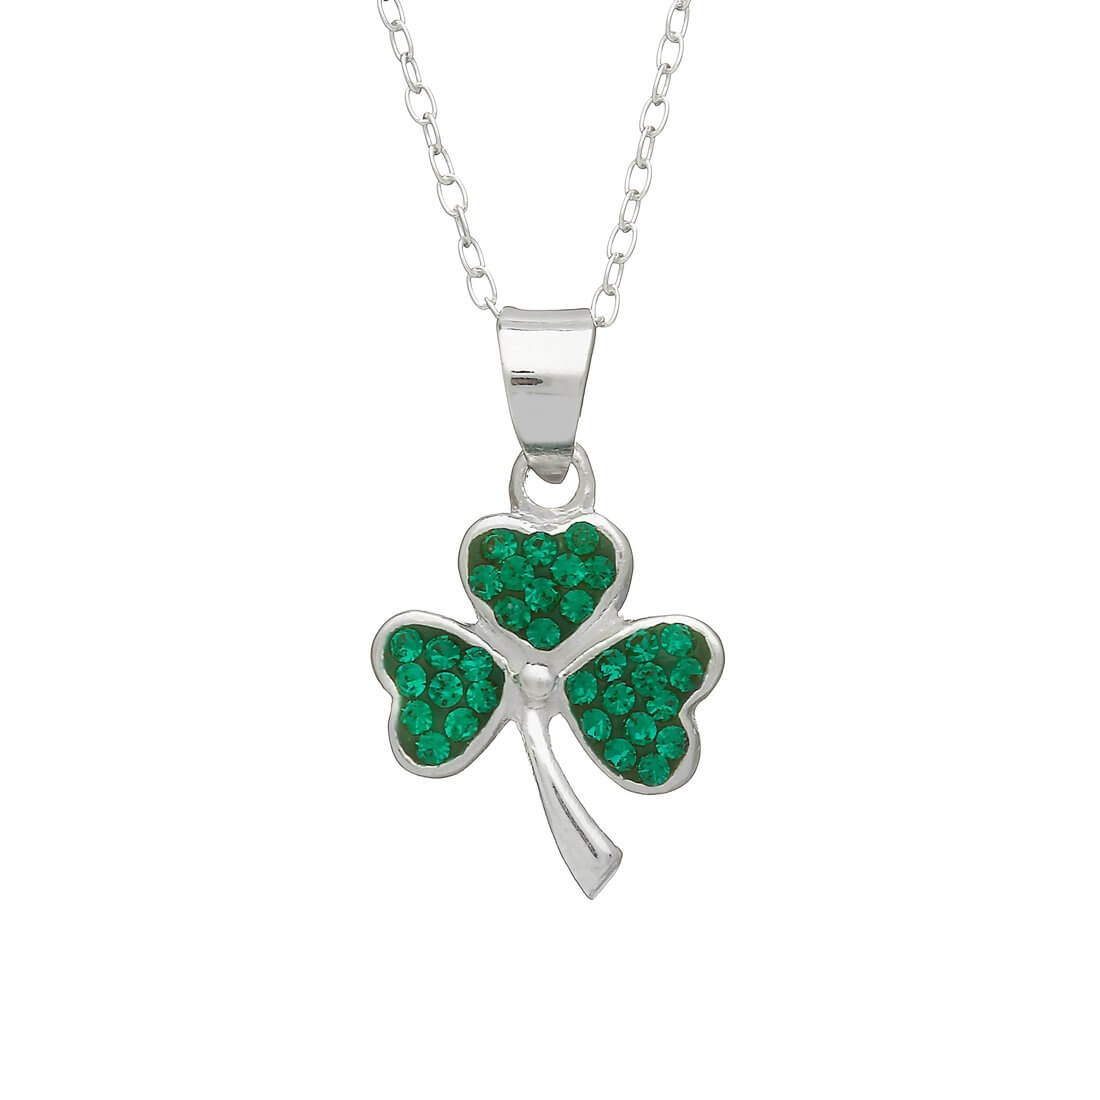 Ladies Sterling Silver Shamrock Pendant with Green CZ Stones